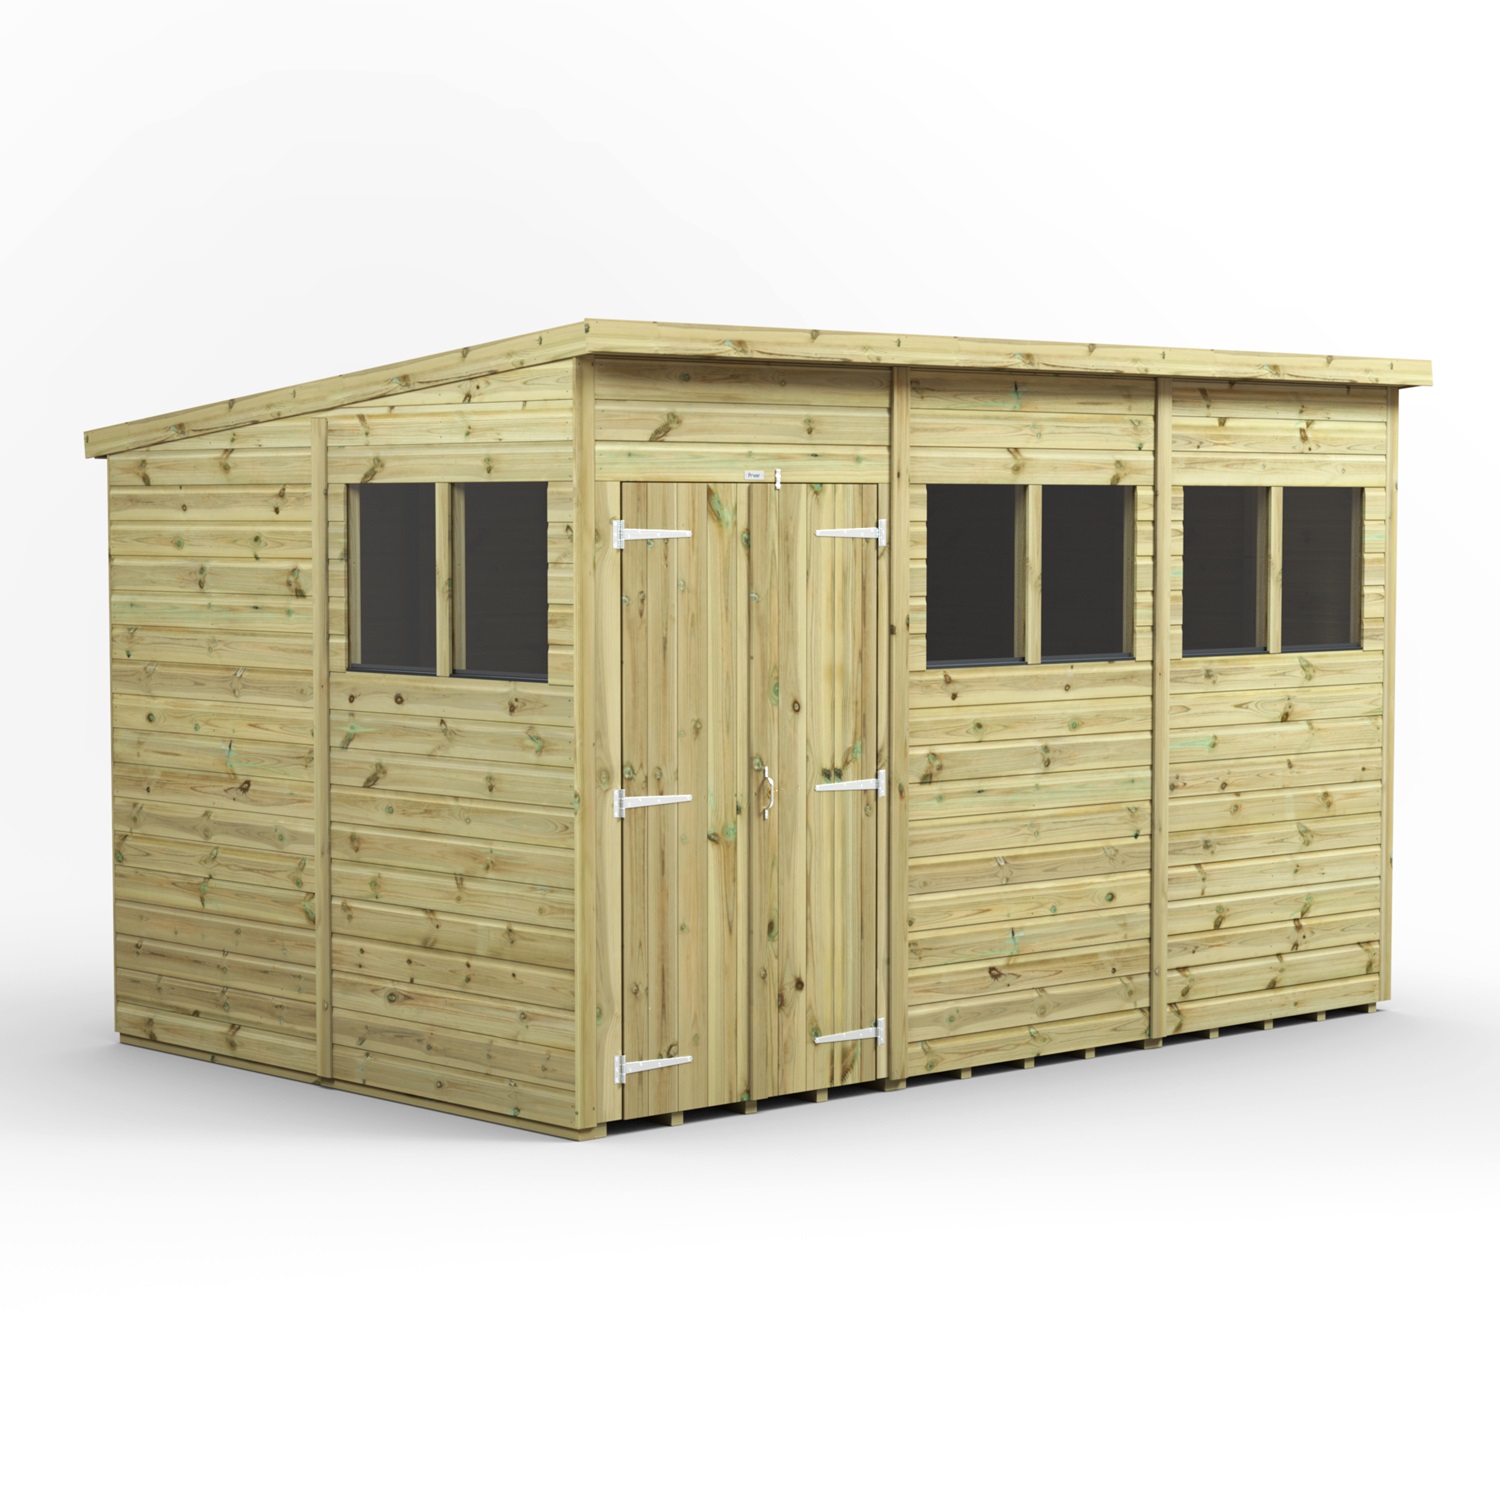 Power 12 x 8 Premium Pent Pressure Treated Shed With Double Door